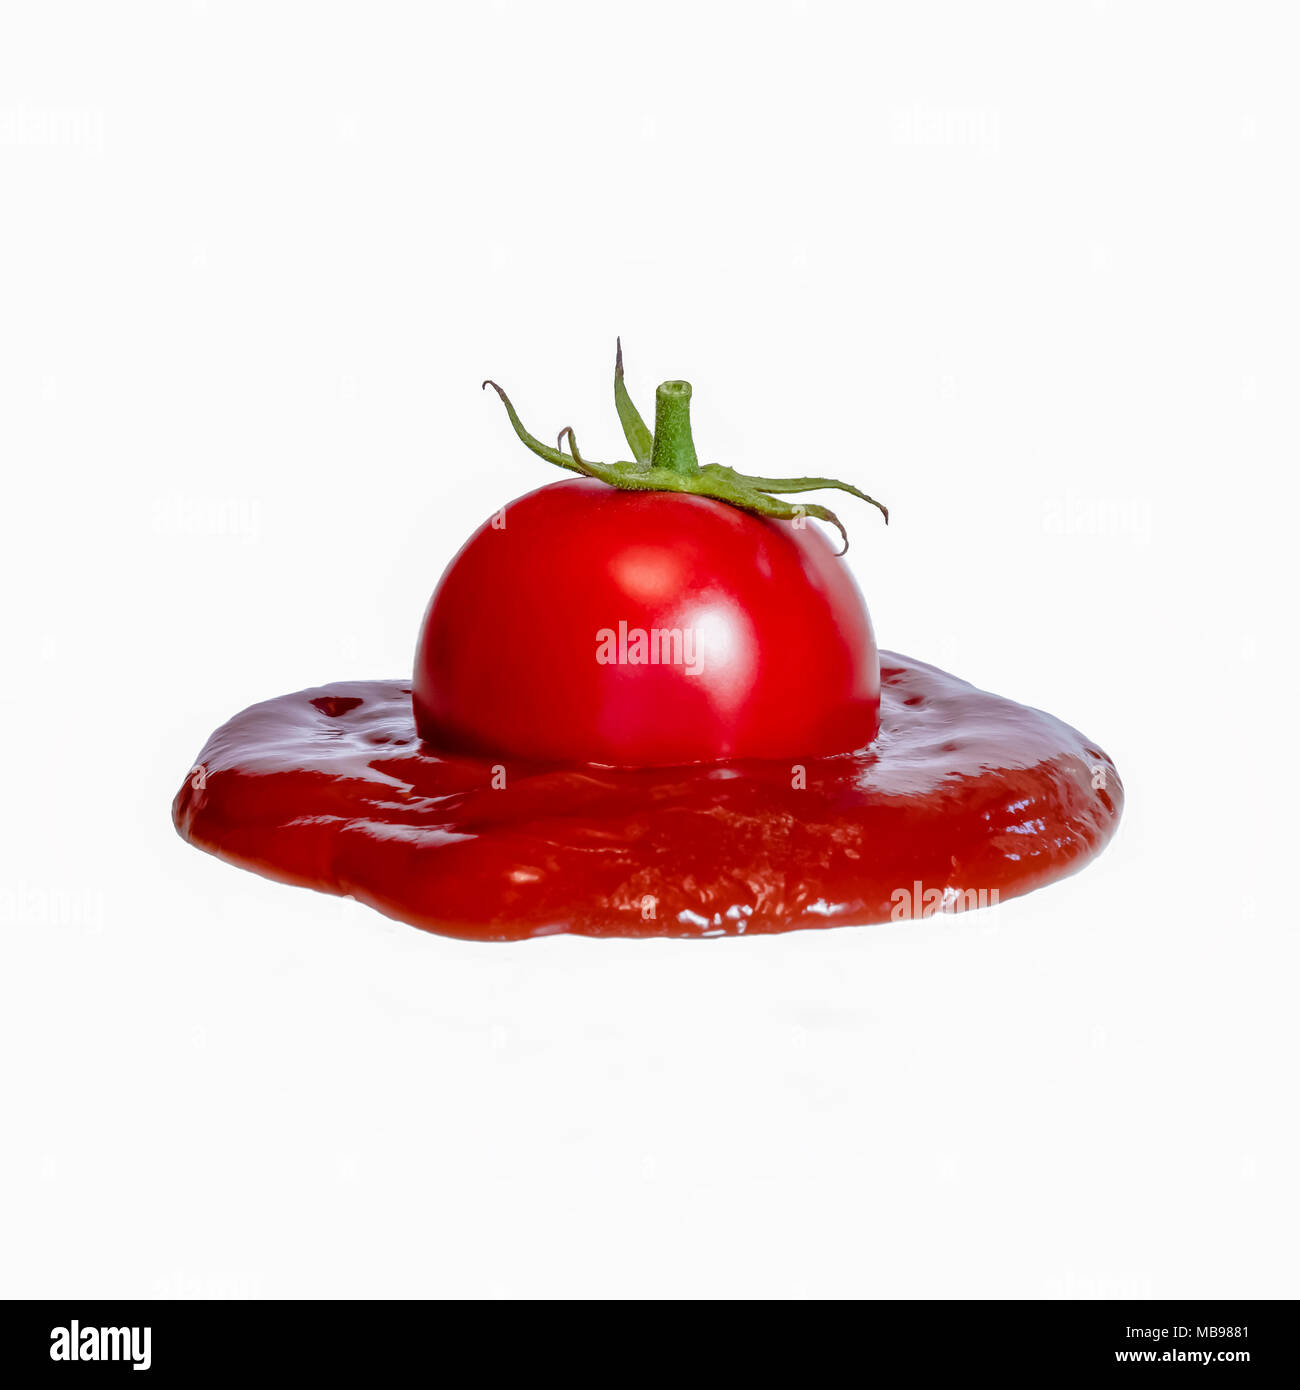 Ketchup concept tomato puree board ingredients italian sauce on white background Stock Photo